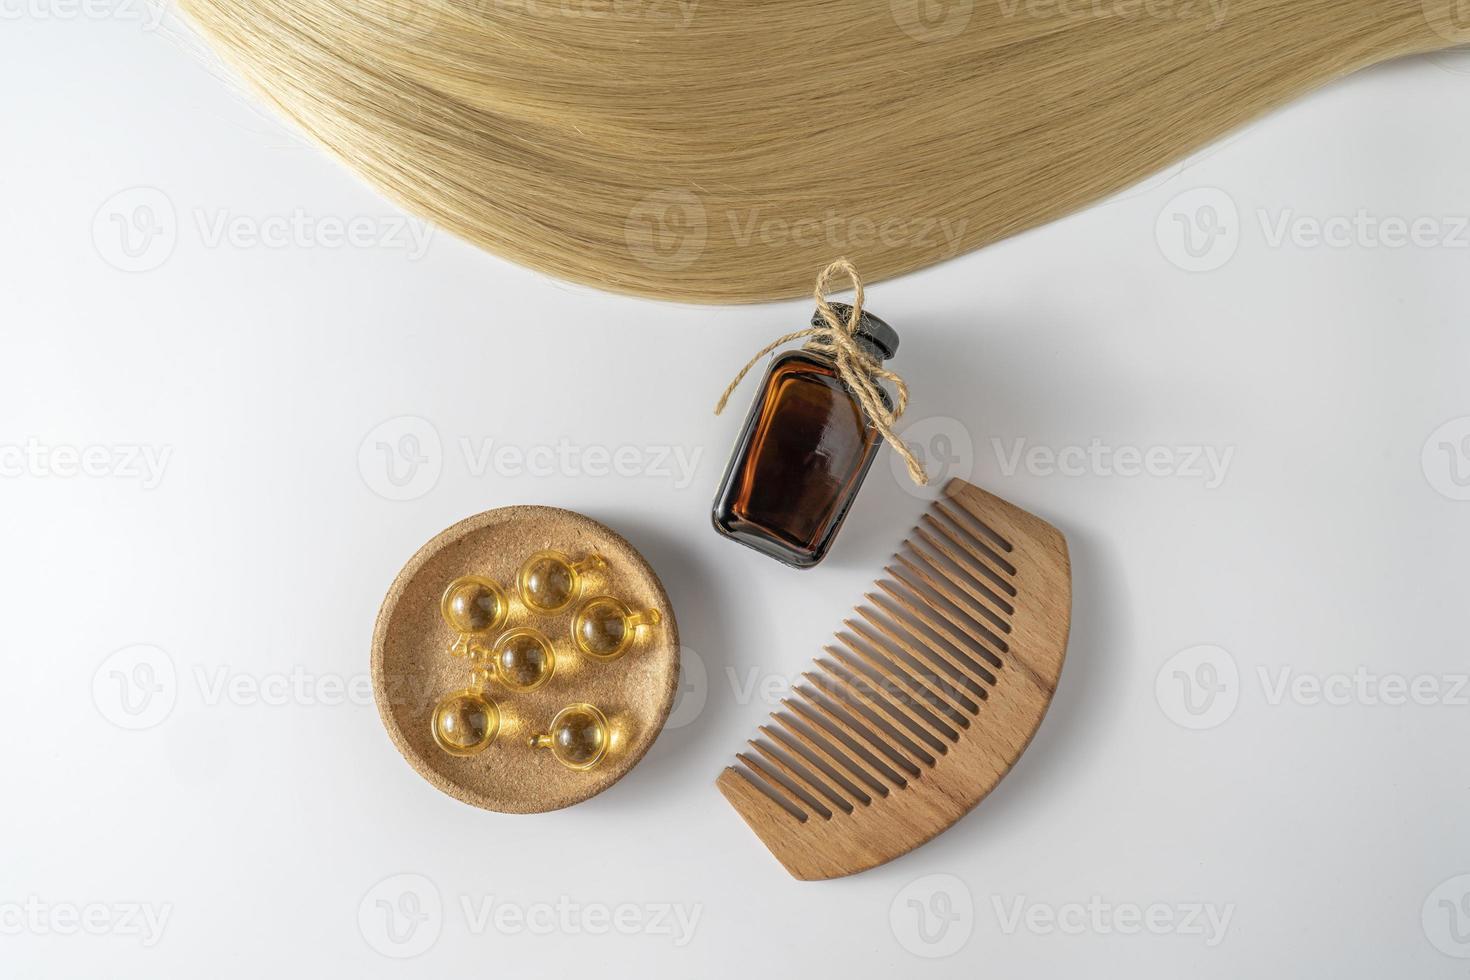 A hair care oil or serum in a brown dropper bottle and golden capsules and a wooden hair comb lying on a white background, product marketing mockup photo